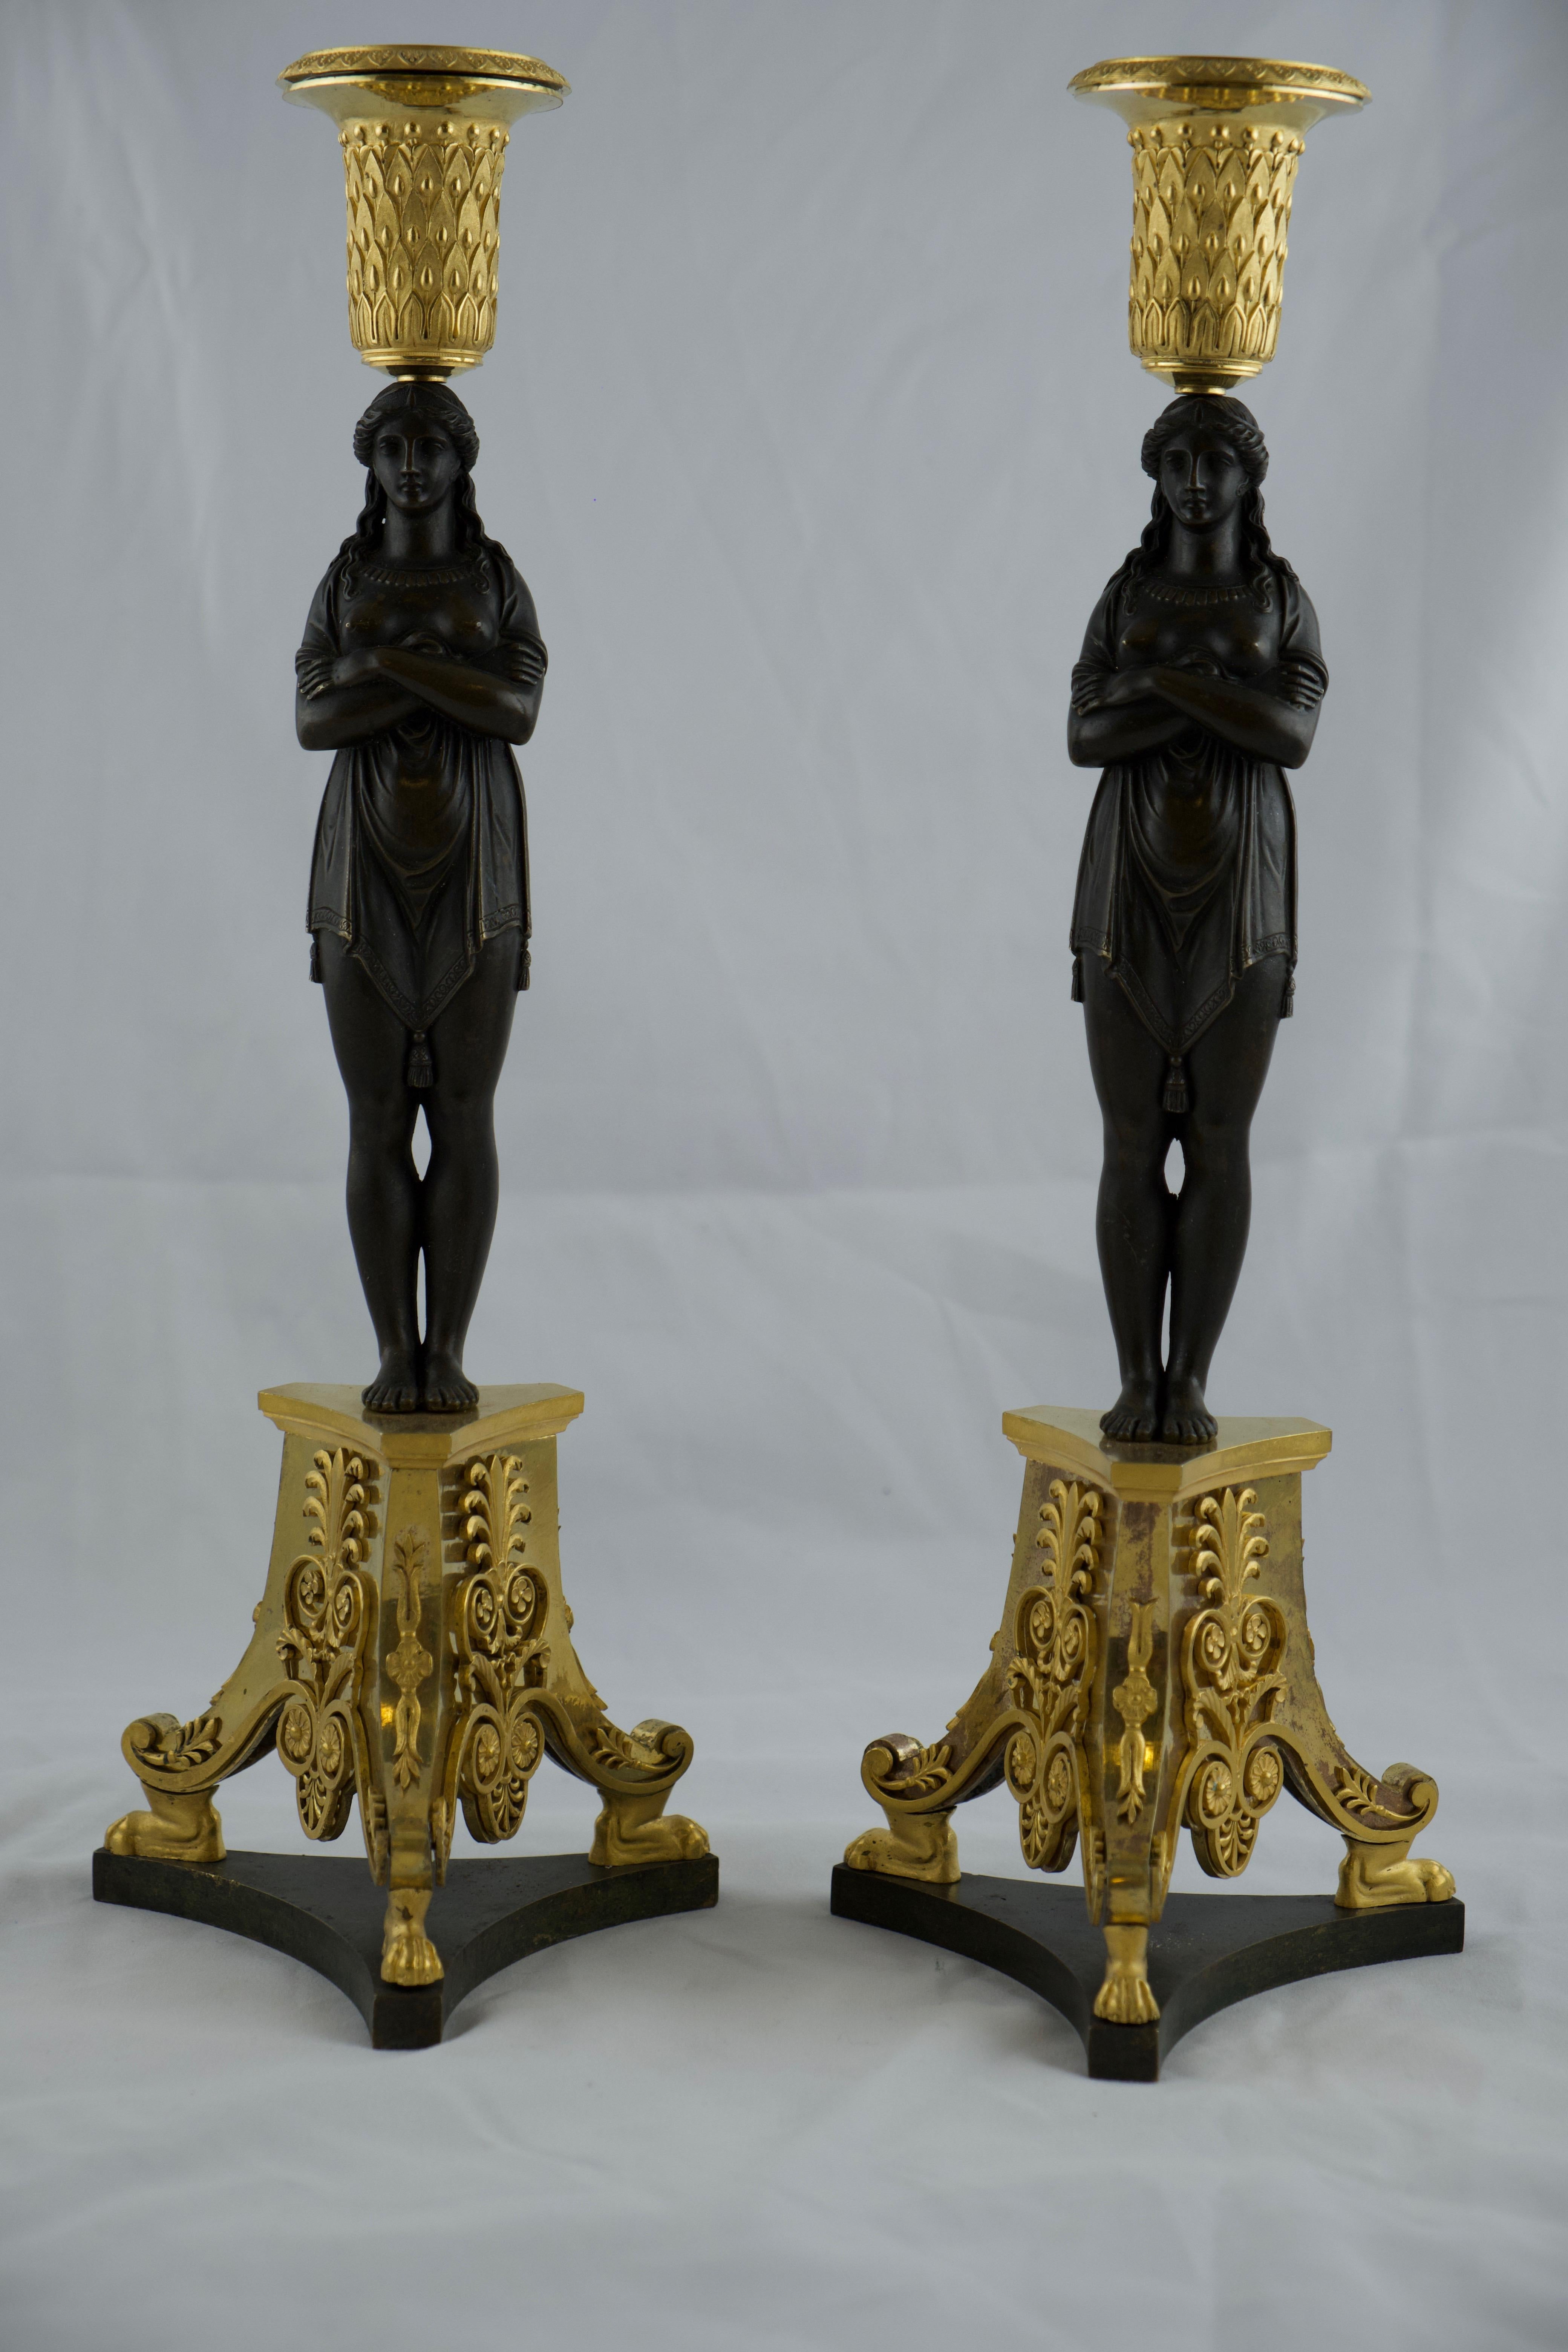 Pair of Large French Empire Candlesticks Made Around Year 1800 For Sale 2